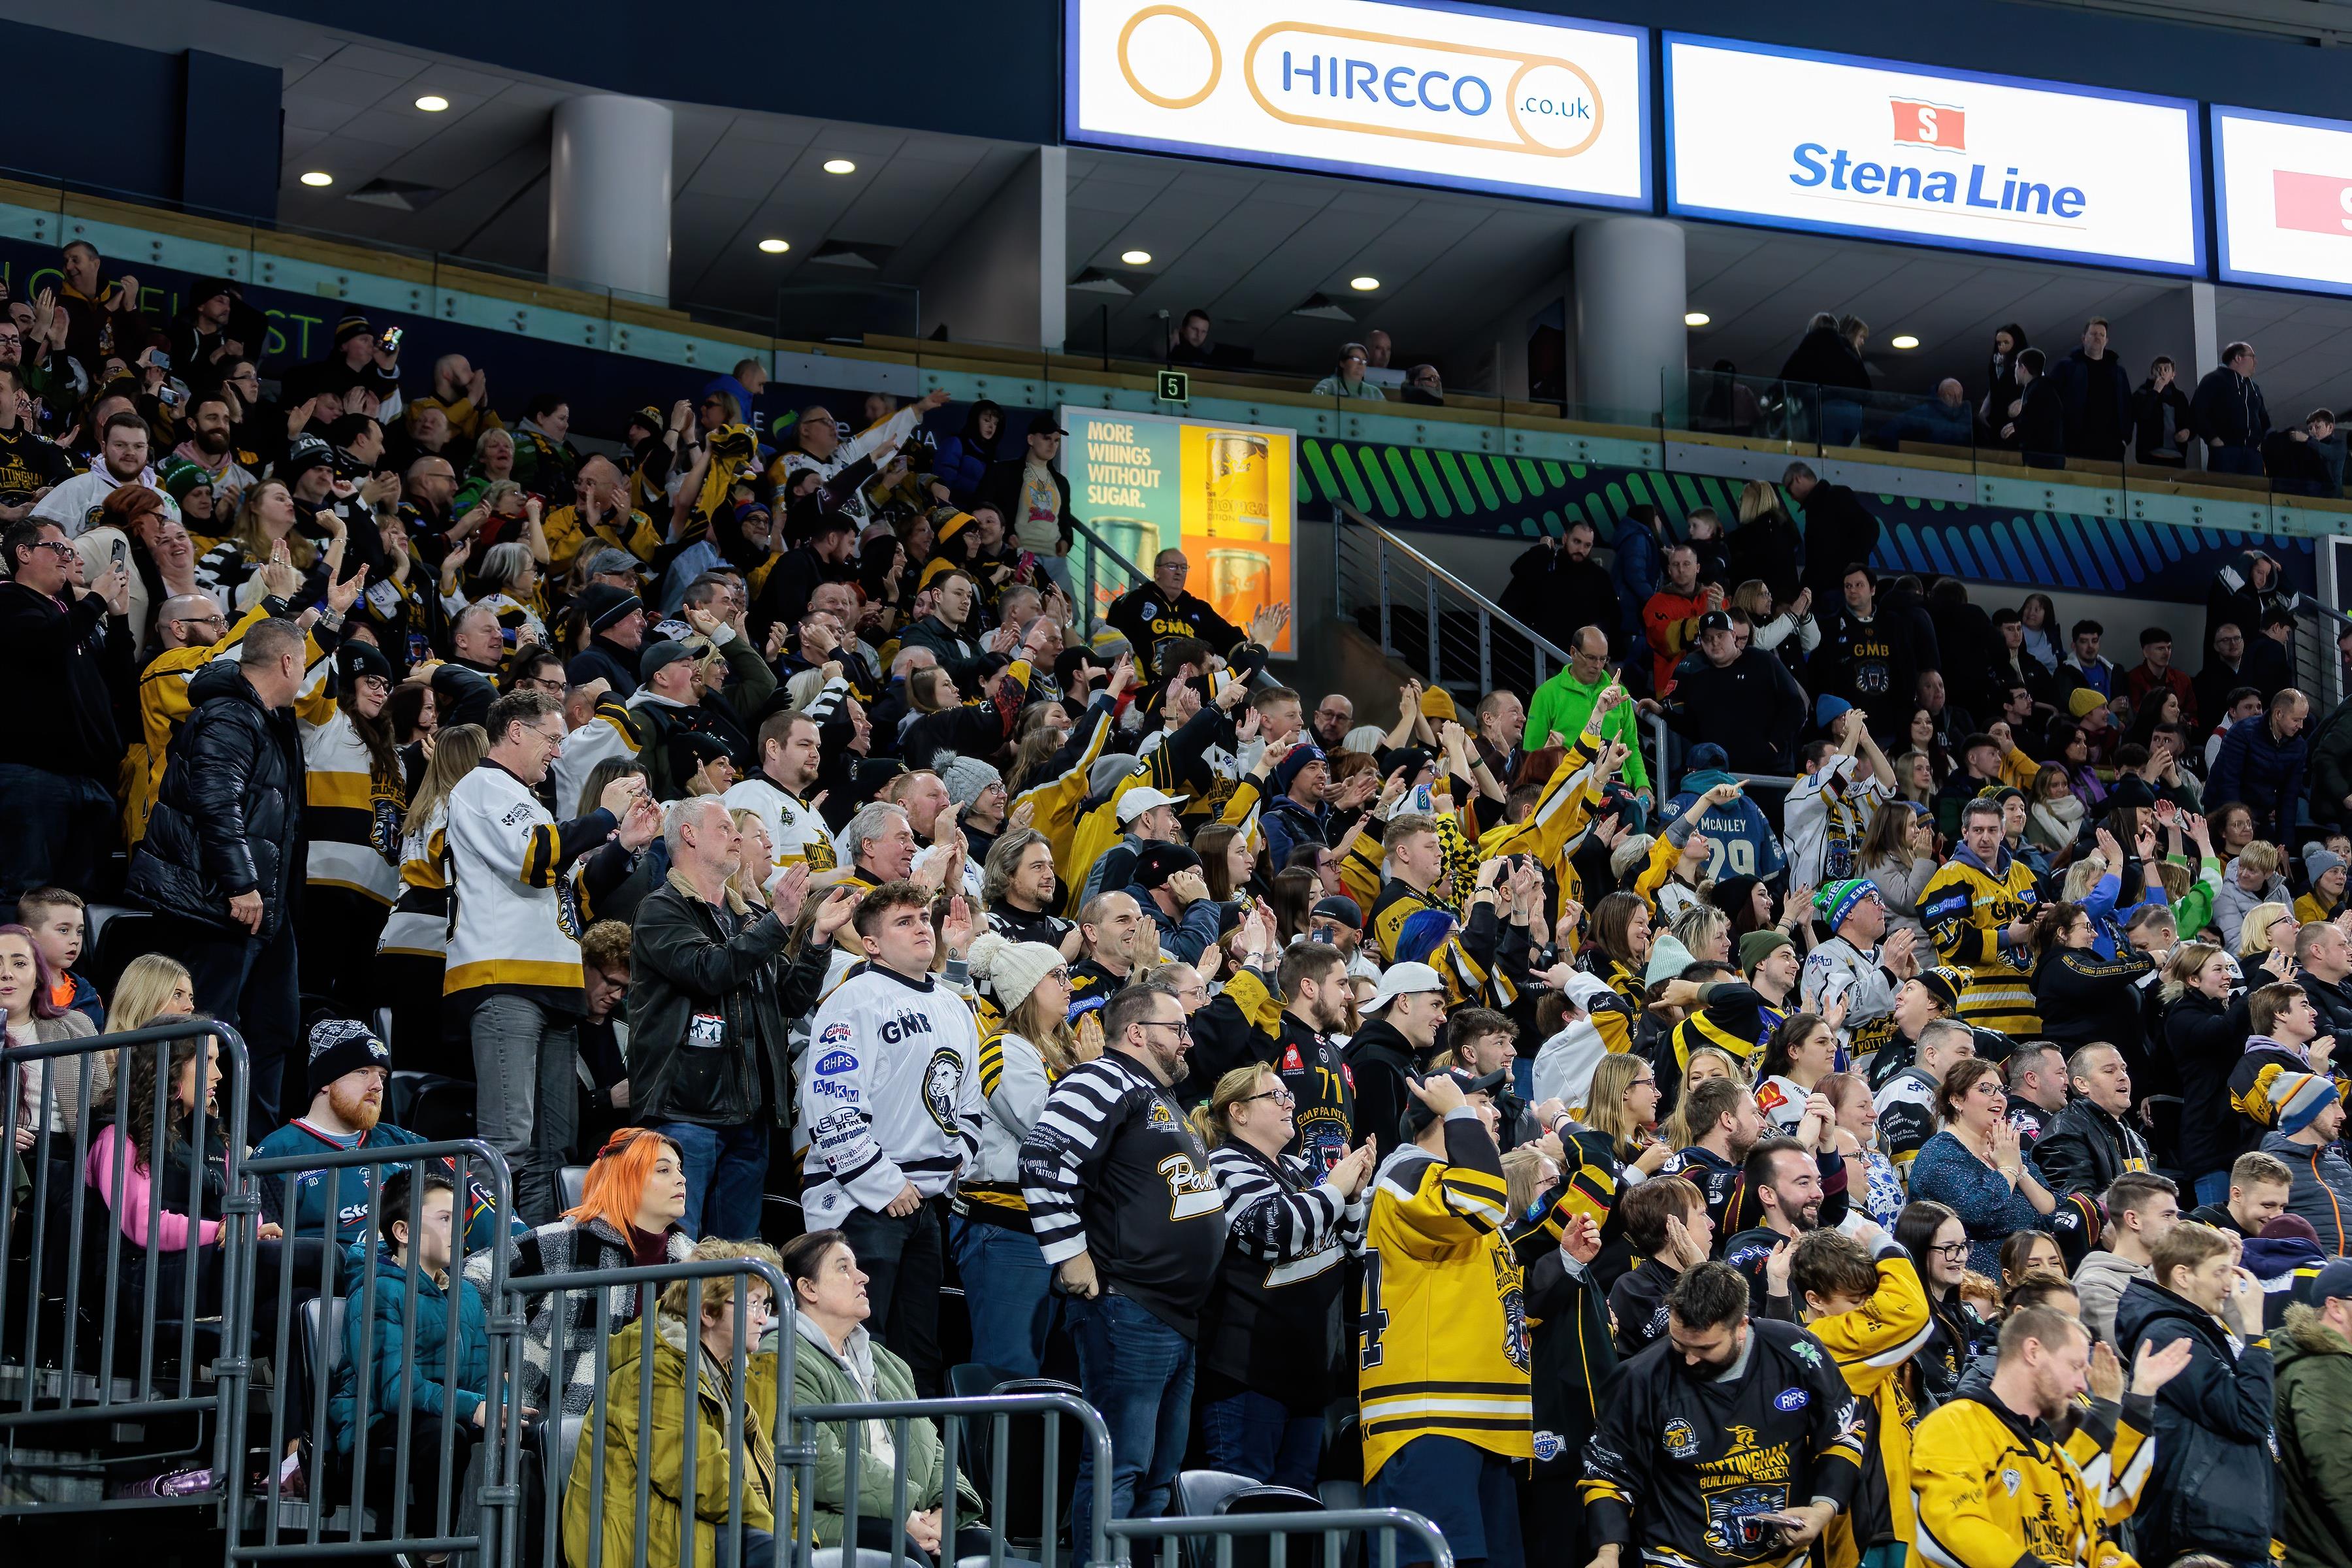 NEILSON THANKS FANS FOR AMAZING SUPPORT IN BELFAST Top Image